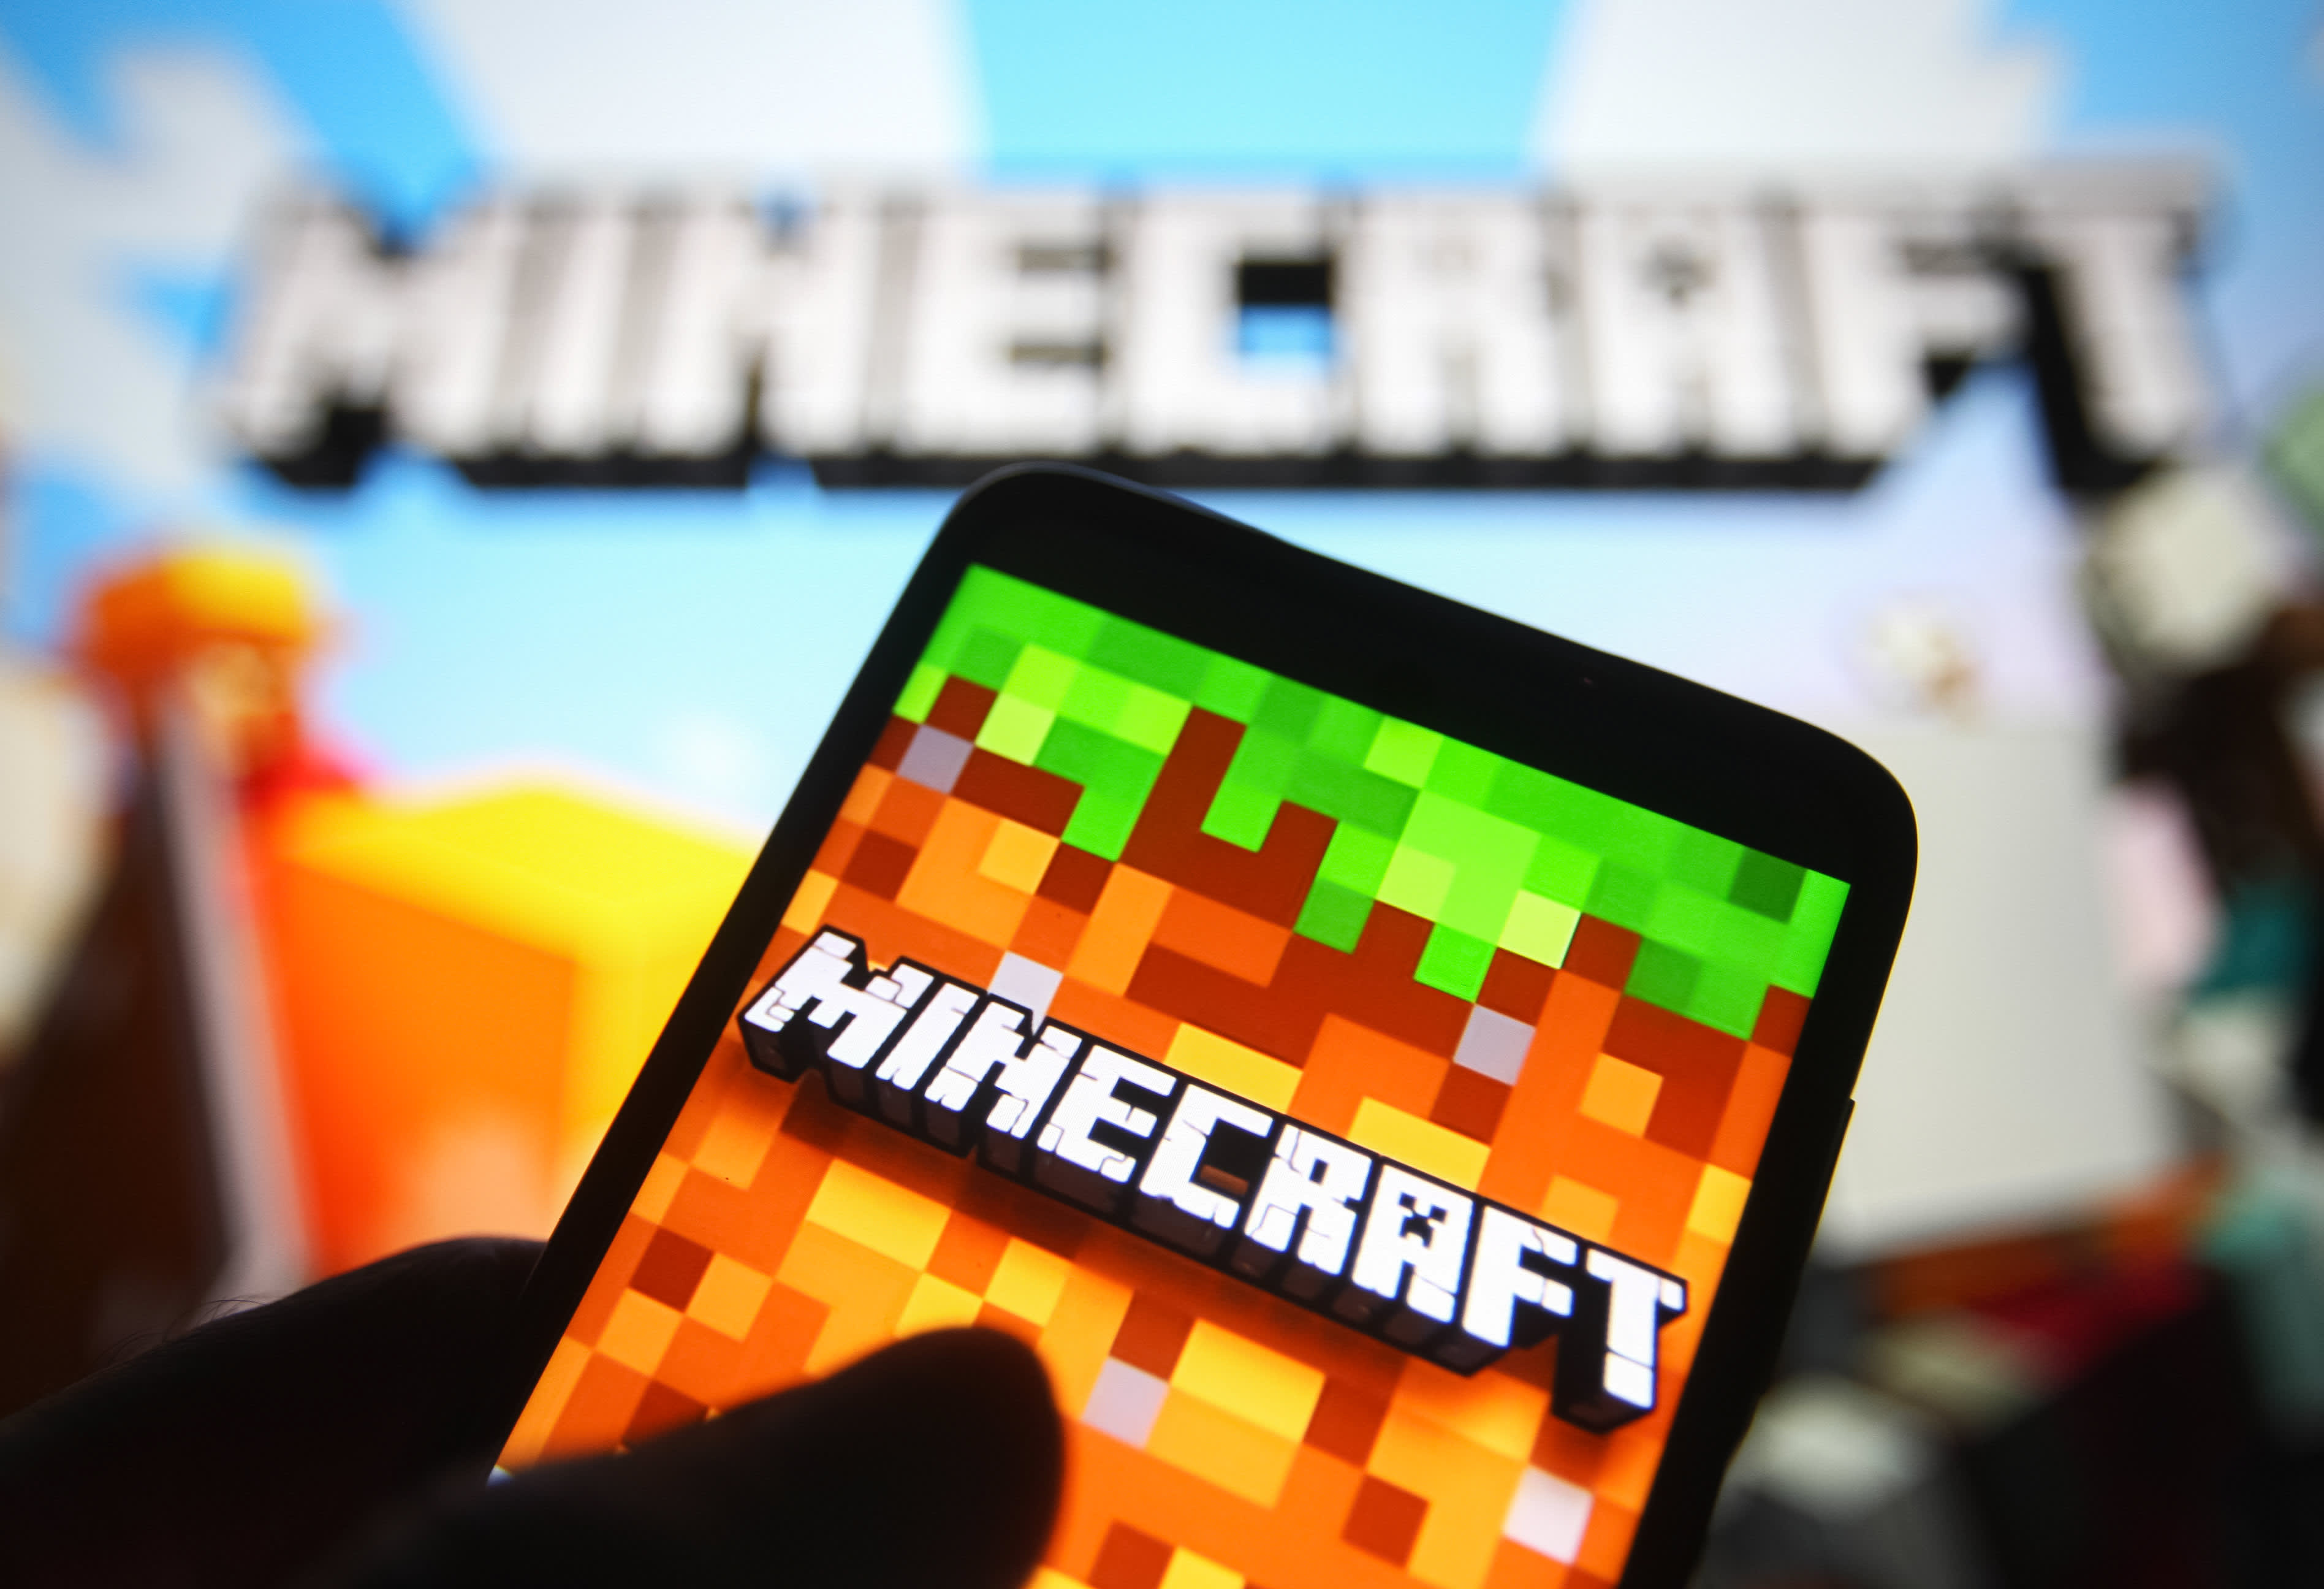 Minecraft: 'The internet's on fire' as techs race to fix software flaw